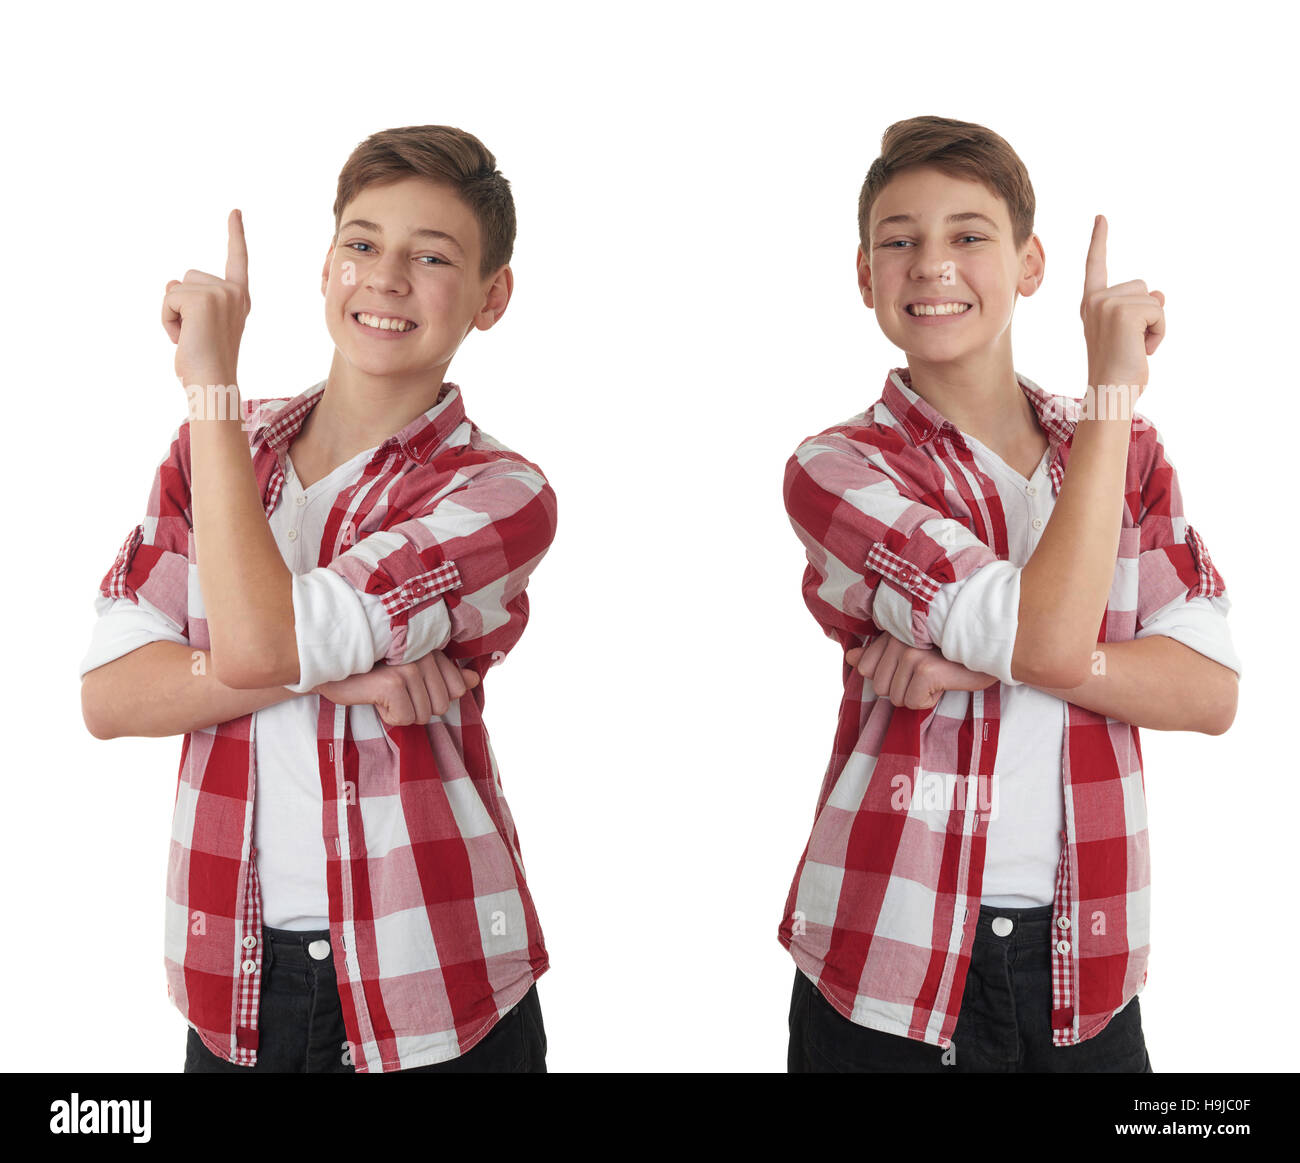 Set of cute teenager boy in red checkered shirt edifying over white isolated background, half body Stock Photo